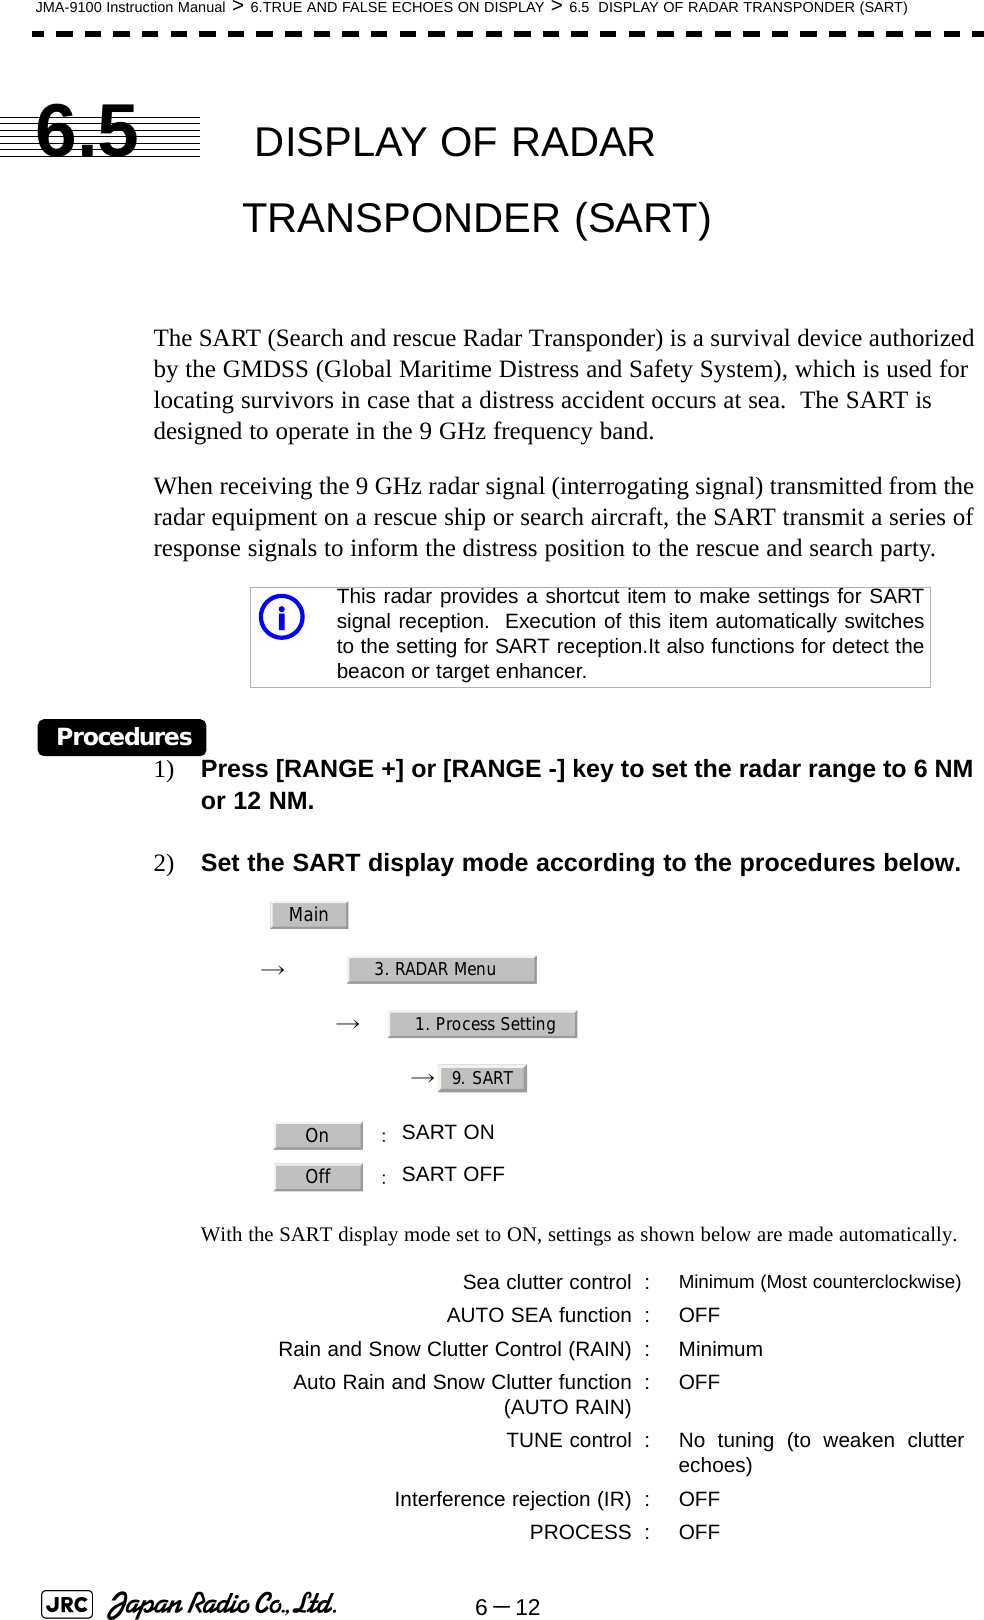 6－12JMA-9100 Instruction Manual &gt; 6.TRUE AND FALSE ECHOES ON DISPLAY &gt; 6.5  DISPLAY OF RADAR TRANSPONDER (SART)6.5  DISPLAY OF RADAR TRANSPONDER (SART)The SART (Search and rescue Radar Transponder) is a survival device authorized by the GMDSS (Global Maritime Distress and Safety System), which is used for locating survivors in case that a distress accident occurs at sea.  The SART is designed to operate in the 9 GHz frequency band.When receiving the 9 GHz radar signal (interrogating signal) transmitted from the radar equipment on a rescue ship or search aircraft, the SART transmit a series of response signals to inform the distress position to the rescue and search party.Procedures1) Press [RANGE +] or [RANGE -] key to set the radar range to 6 NM or 12 NM.2) Set the SART display mode according to the procedures below.　　 →　　　 →　→ With the SART display mode set to ON, settings as shown below are made automatically.This radar provides a shortcut item to make settings for SARTsignal reception.  Execution of this item automatically switchesto the setting for SART reception.It also functions for detect thebeacon or target enhancer. ：SART ON  ：SART OFFSea clutter control : Minimum (Most counterclockwise)AUTO SEA function : OFFRain and Snow Clutter Control (RAIN) : MinimumAuto Rain and Snow Clutter function(AUTO RAIN) :OFFTUNE control : No tuning (to weaken clutterechoes)Interference rejection (IR) : OFFPROCESS : OFFiMain3. RADAR Menu1. Process Setting9. SARTOnOff